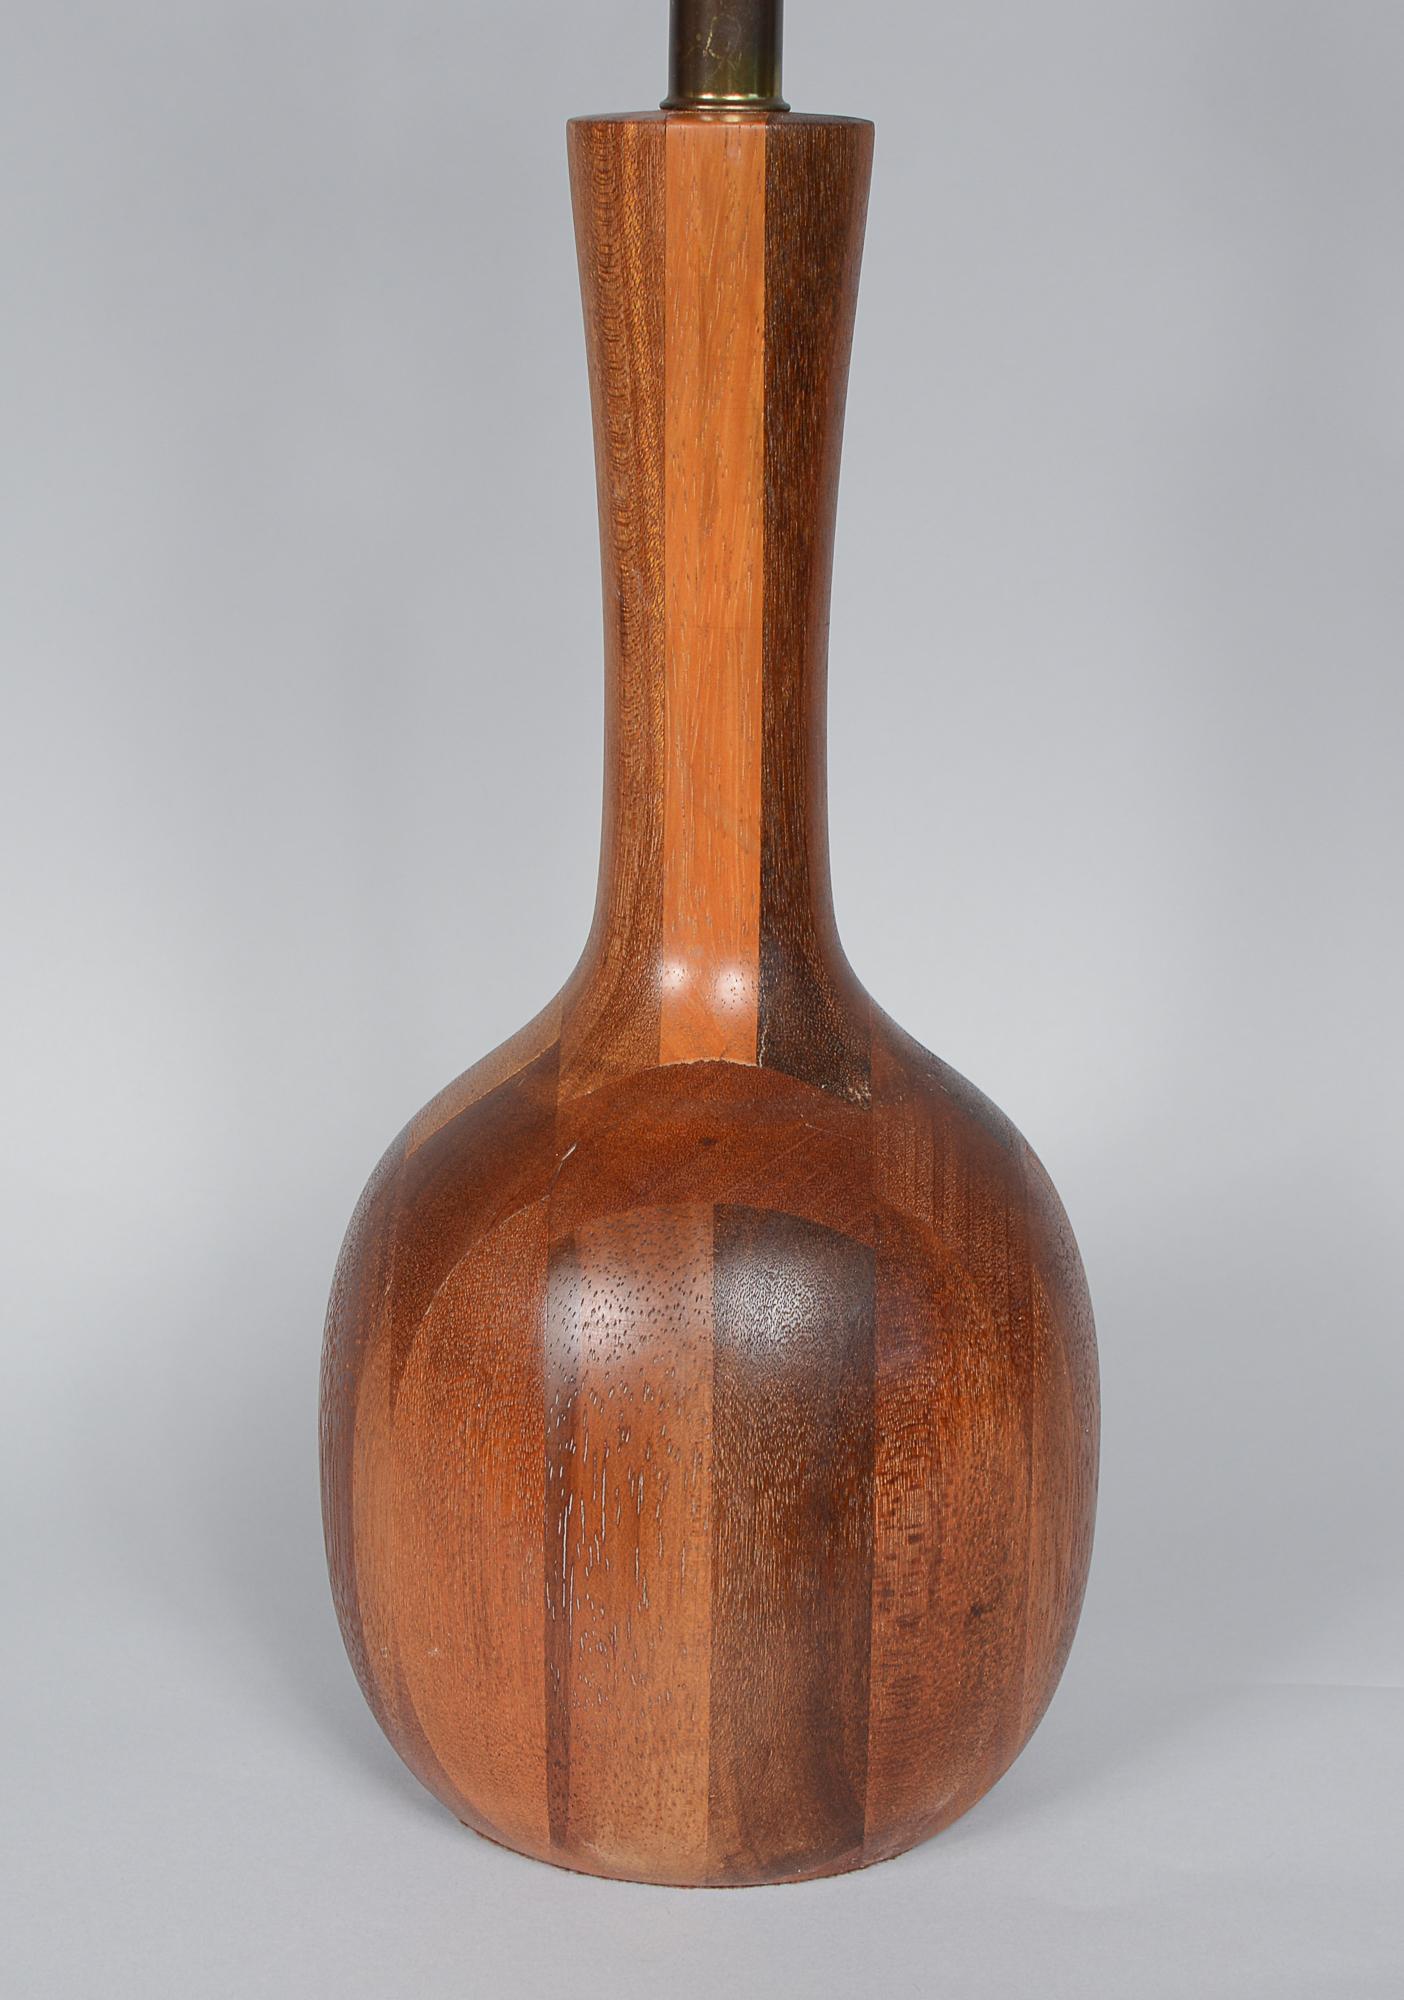 Turned solid teak table lamp in a bottle form. This lamp has a rich beautiful grain. Height to the bottom of the socket is 16 inches.